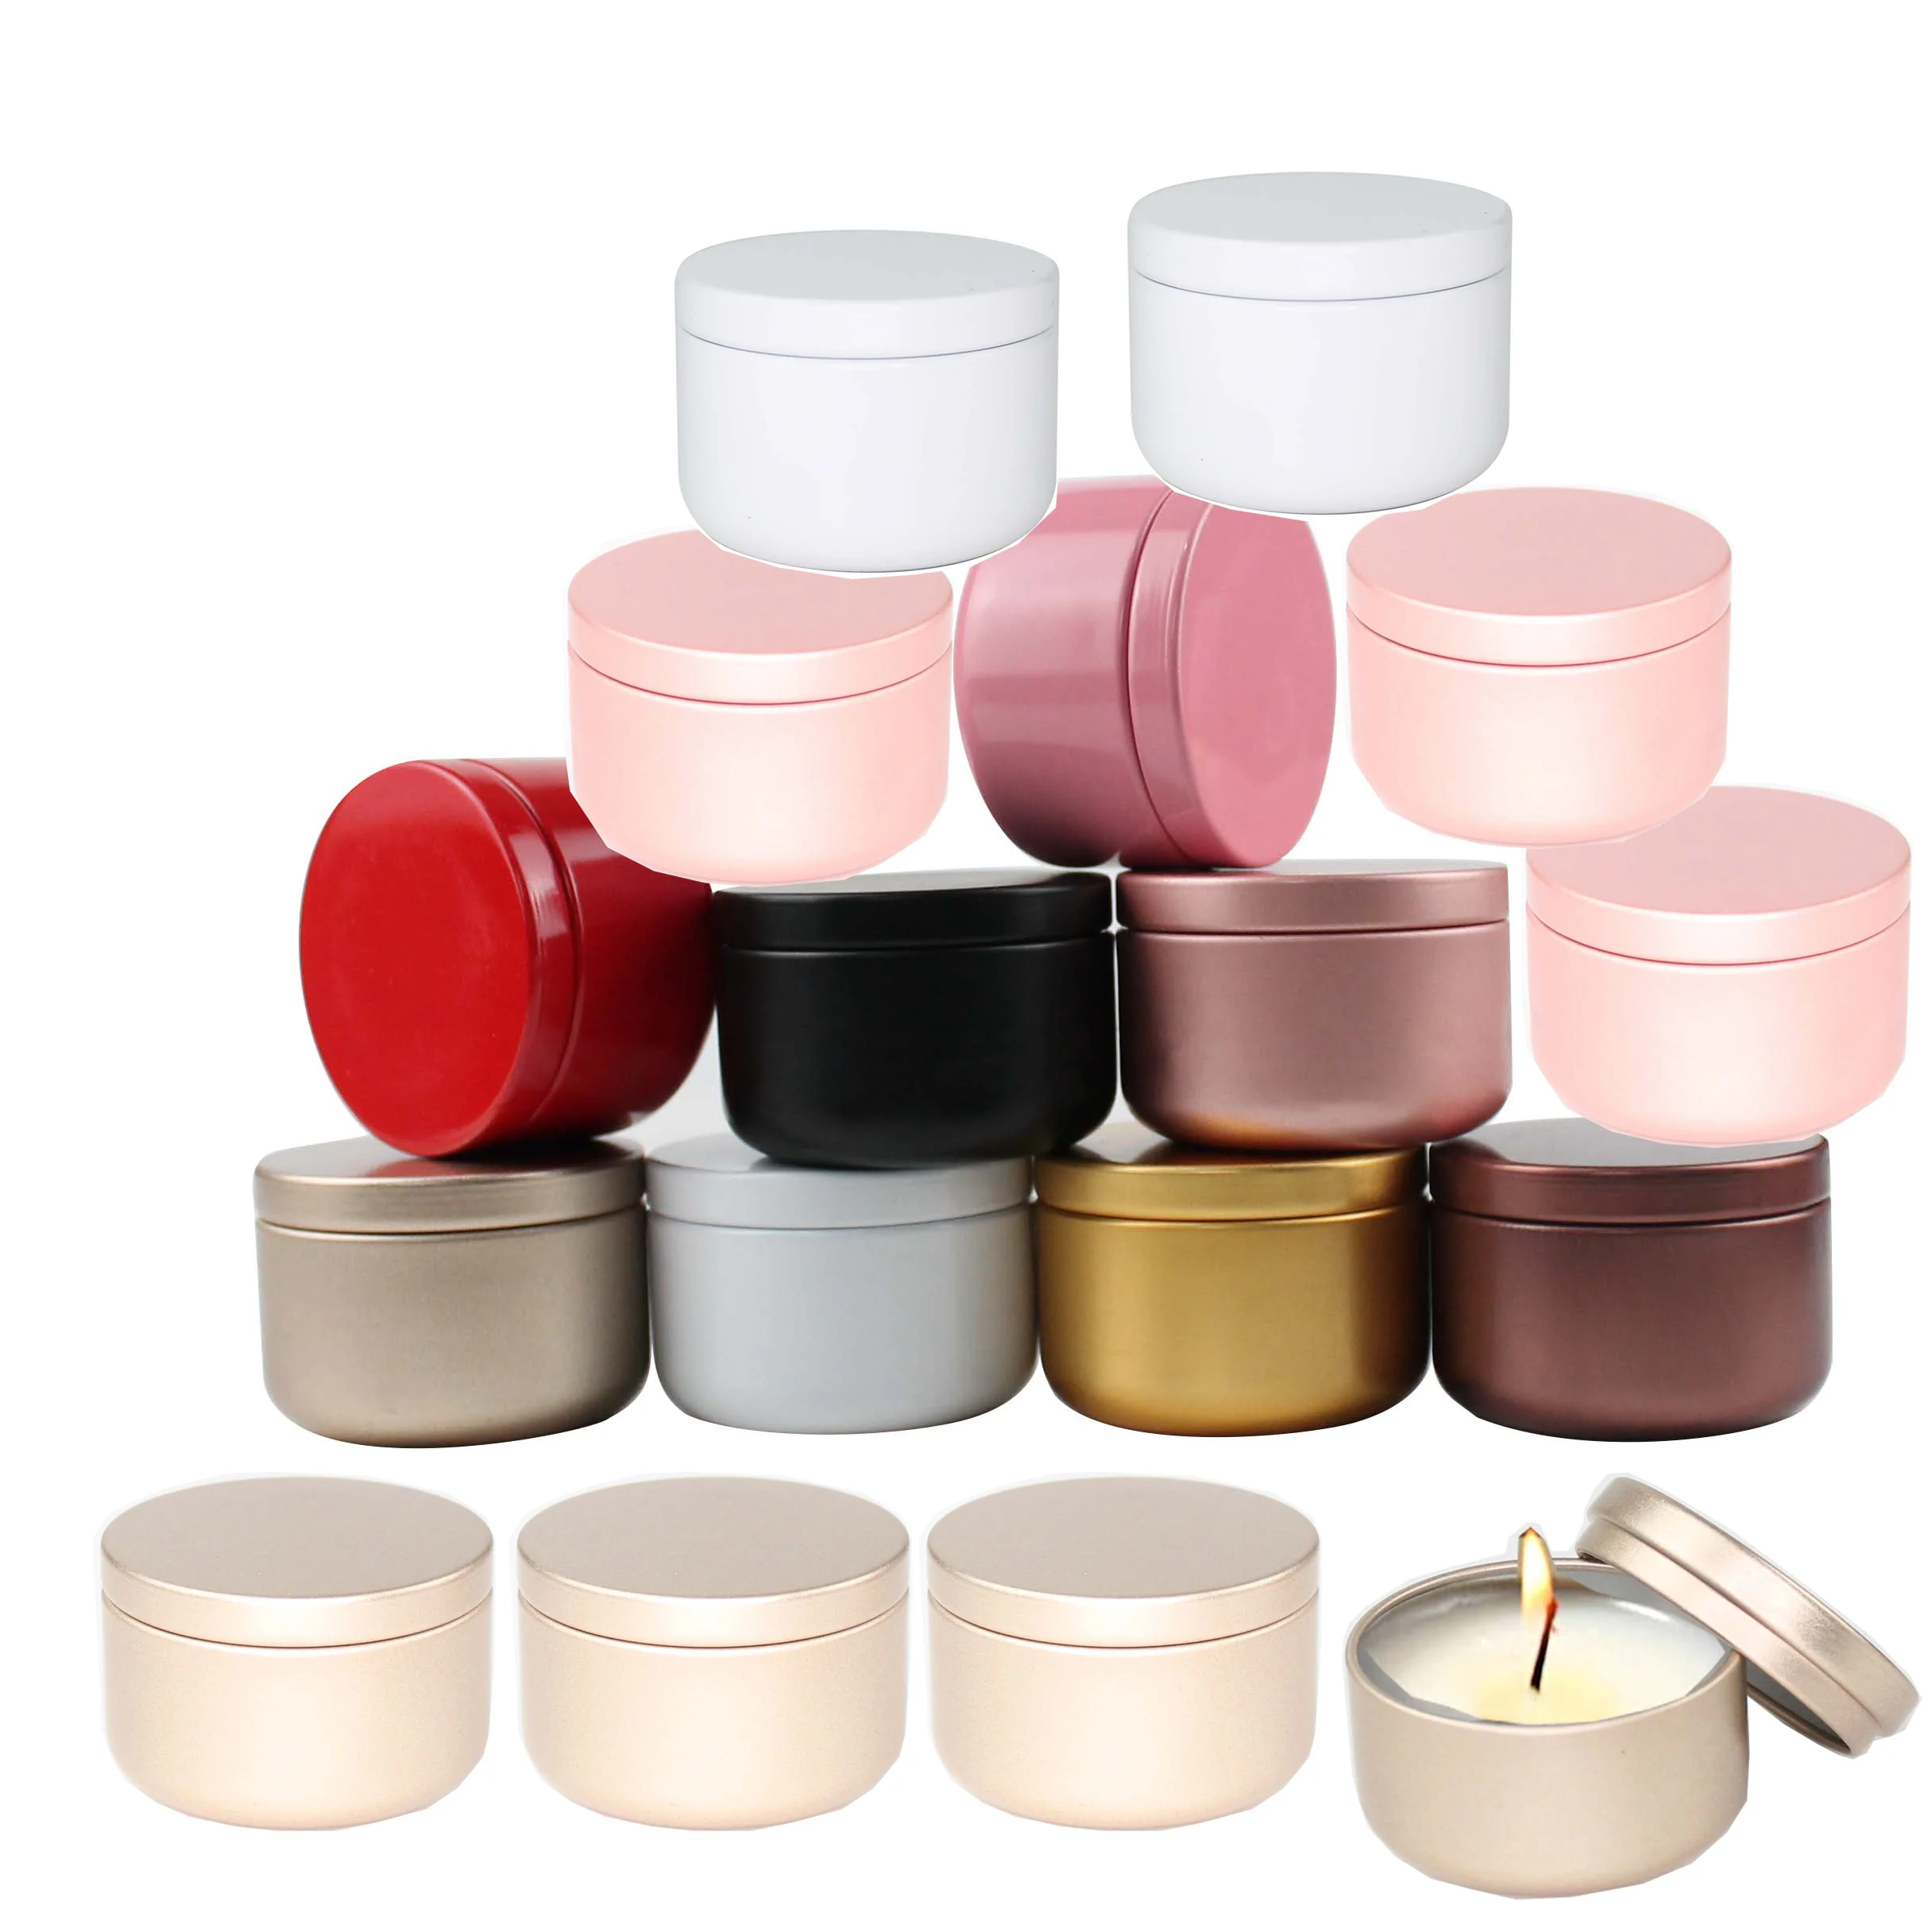 20/30/50pcs Aluminum Candle Tin 50ml Round Candle Containers Cosmetic Jars Oil Cream Pot Empty Aromatherapy Sealed Metal Can mini blue and white porcelain grain diffuser humidifier ultrasonic portable aromatherapy machine silent 7 color changing lights